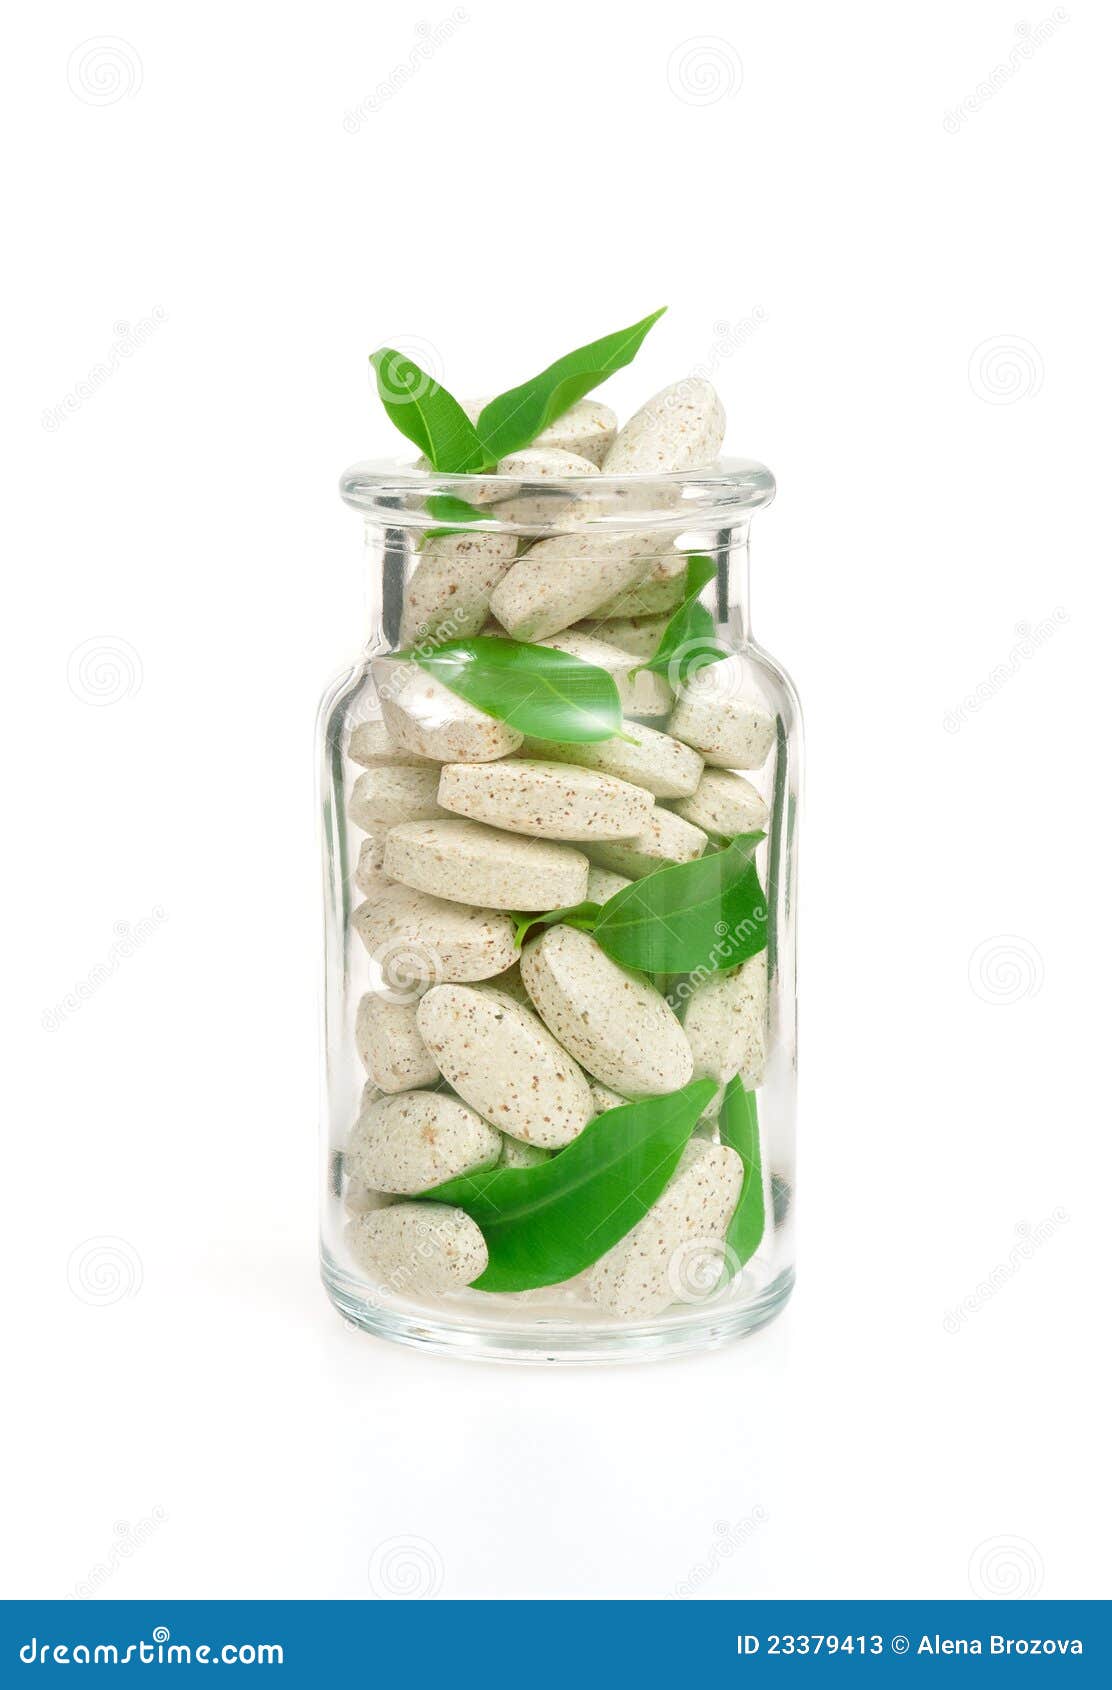 herbal supplement pills and fresh leaves in glass